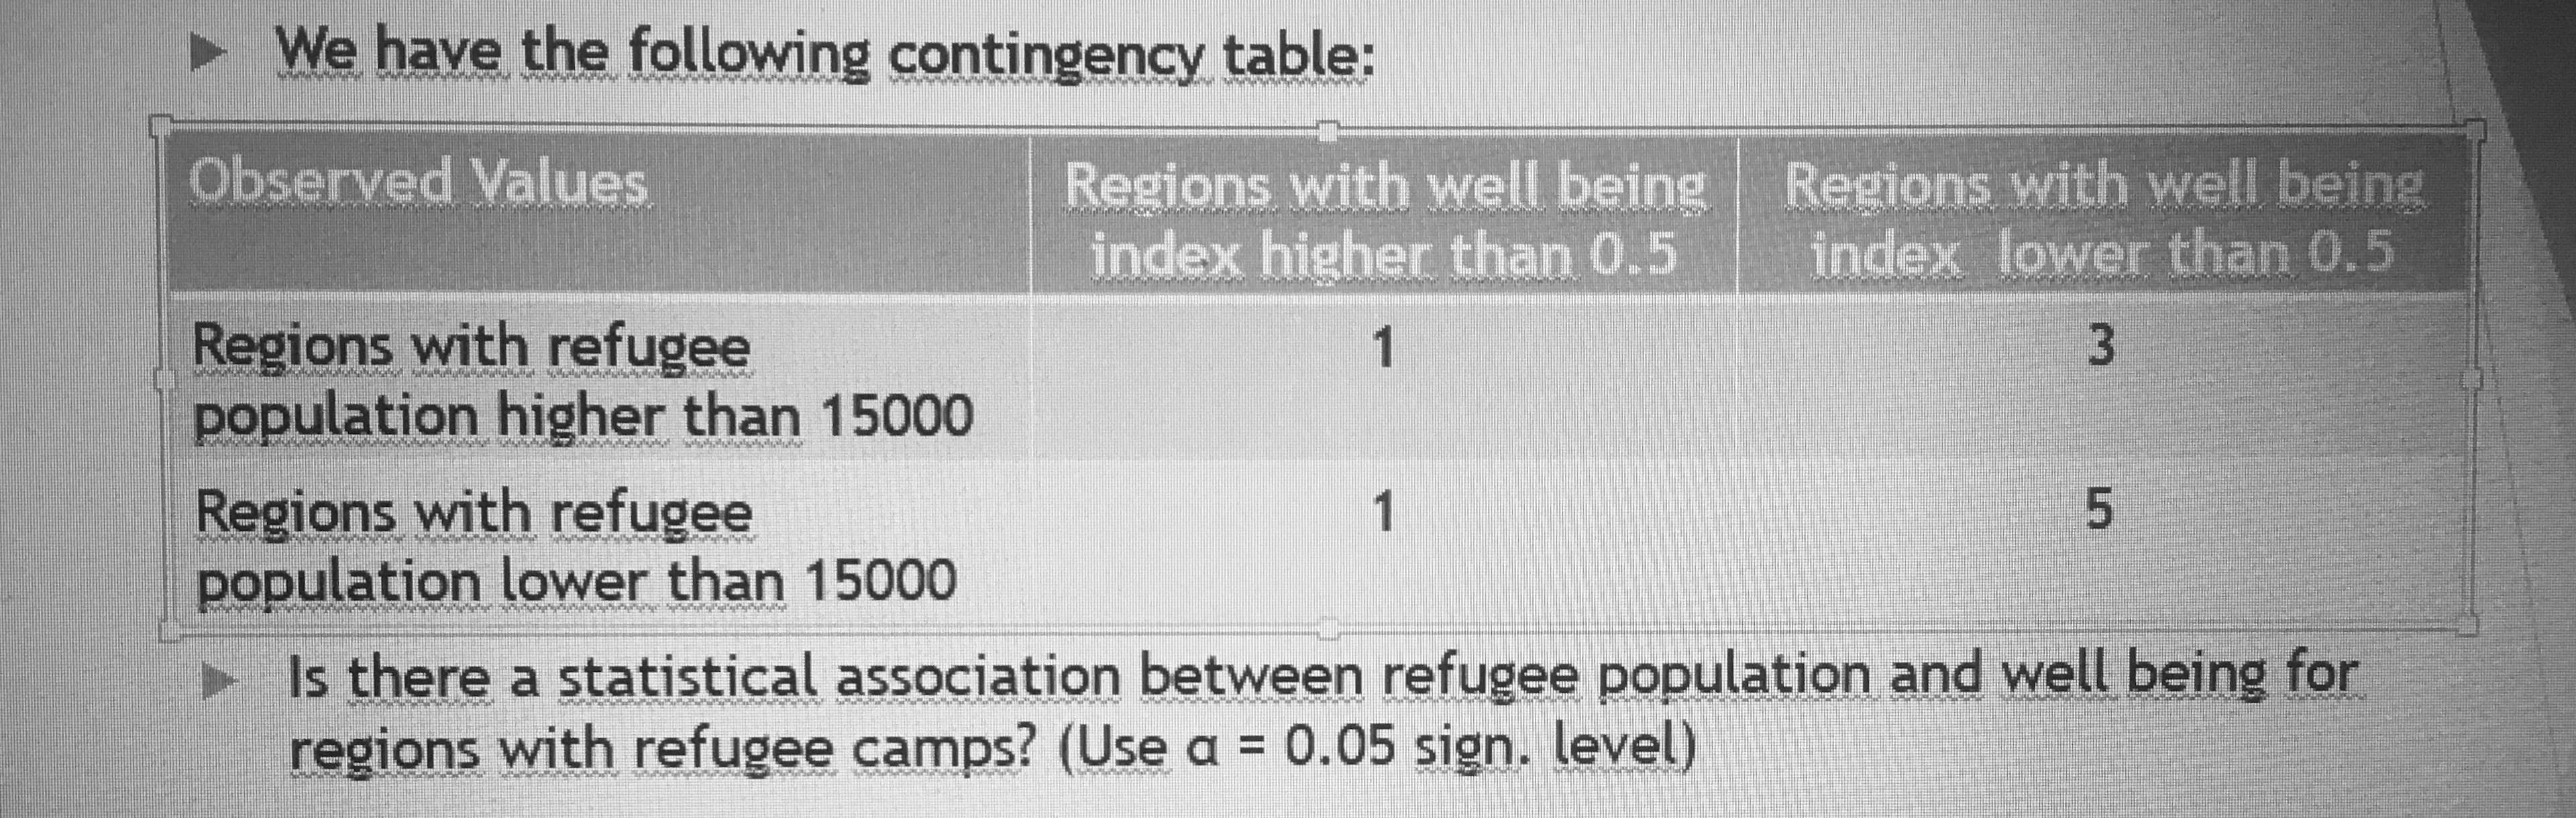 Observed Values
Regions with well being Regions with well being
index higher then 0.5
index lower than 0.5
Regions with refugee
population higher than 15000
Regions with refugee
population lower than 15000
Is there a statistical association between refugee population and well being for
regions with refugee camps? (Use a = 0.05 sign. level)
%3D
